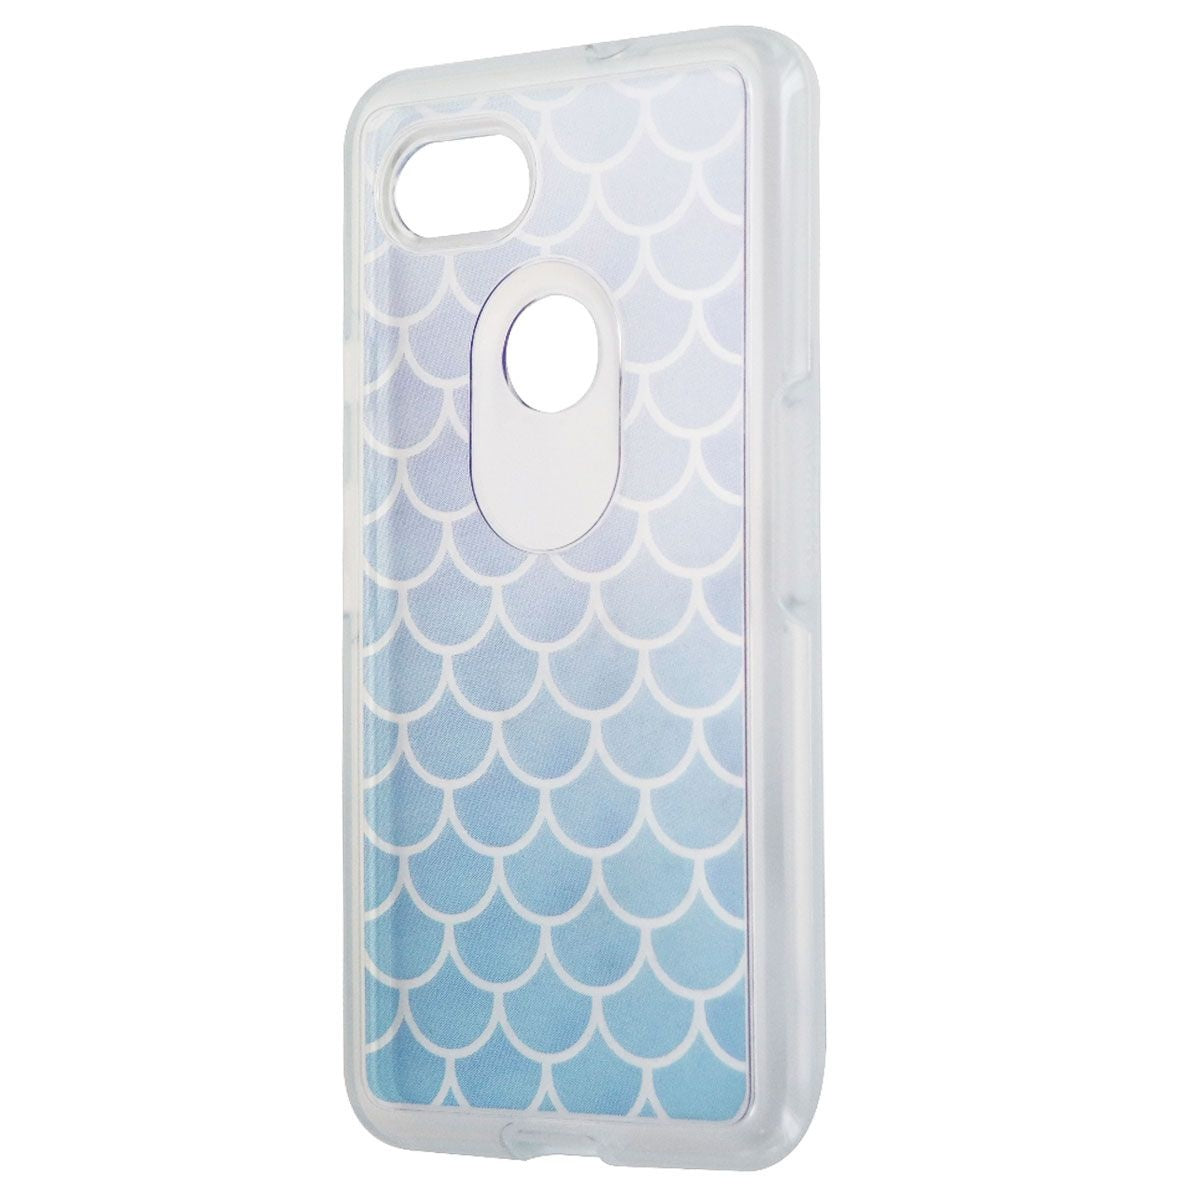 OtterBox Symmetry Series Hybrid Case for Google Pixel 2 XL - Clear / Blue Scales